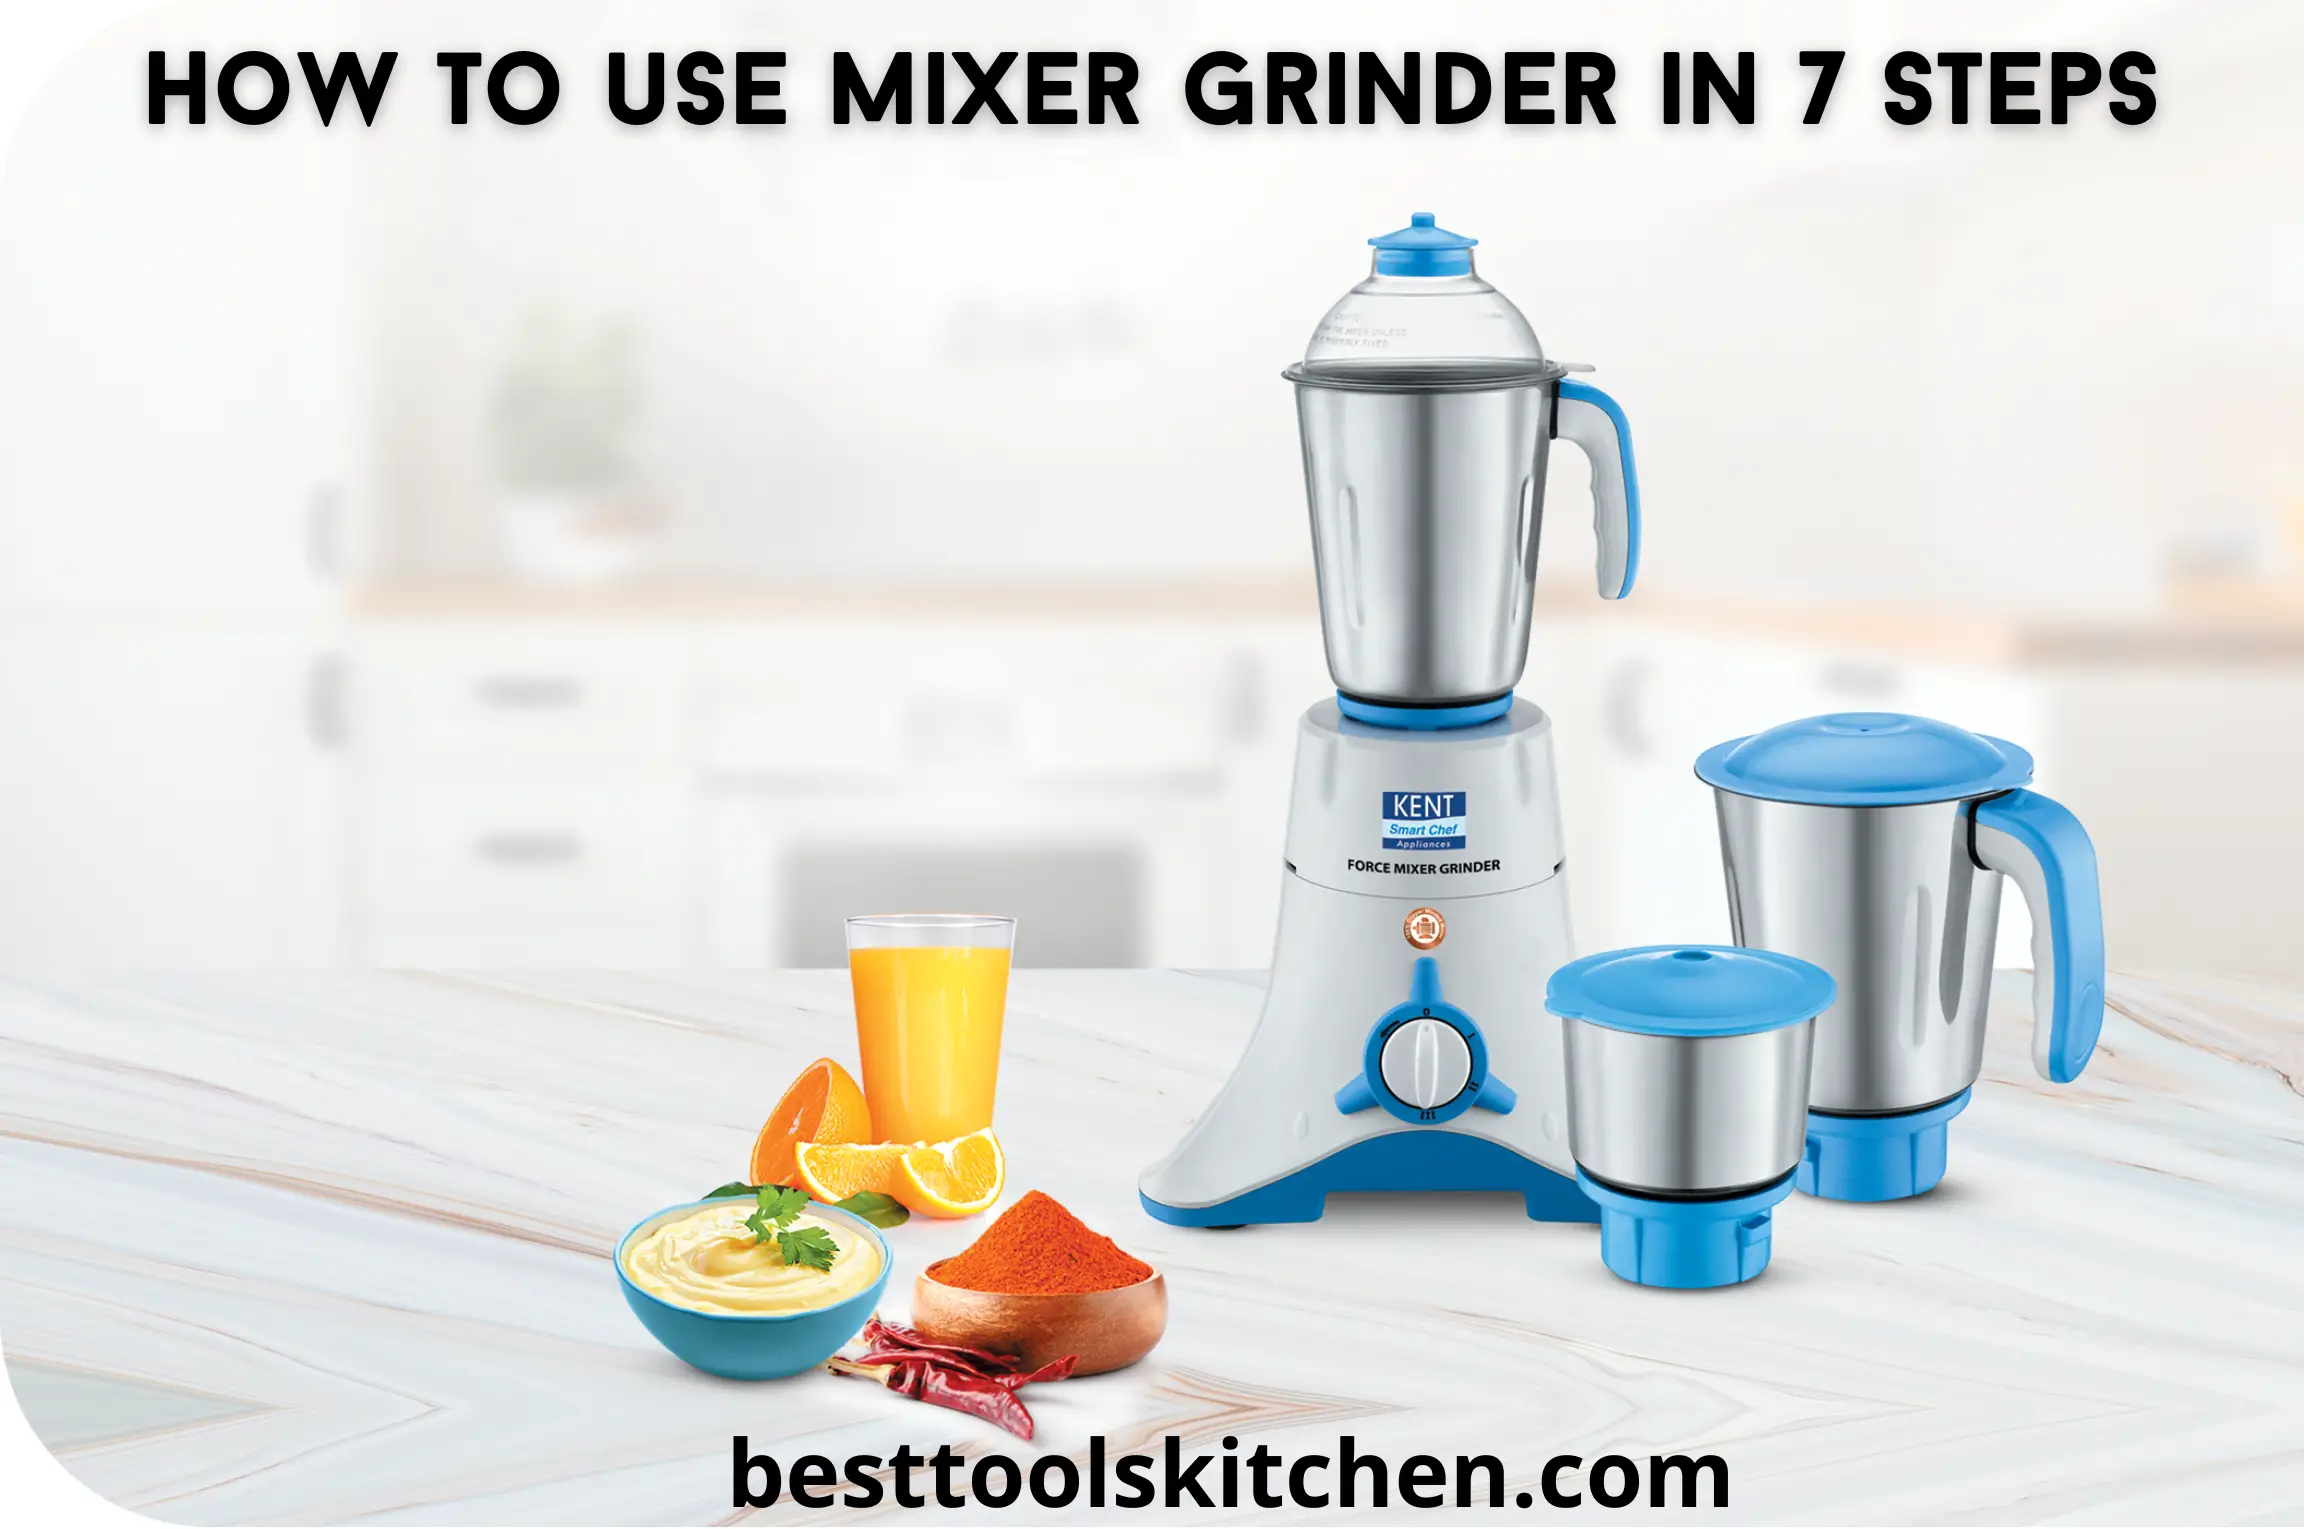 How to use mixer grinder in 7 steps